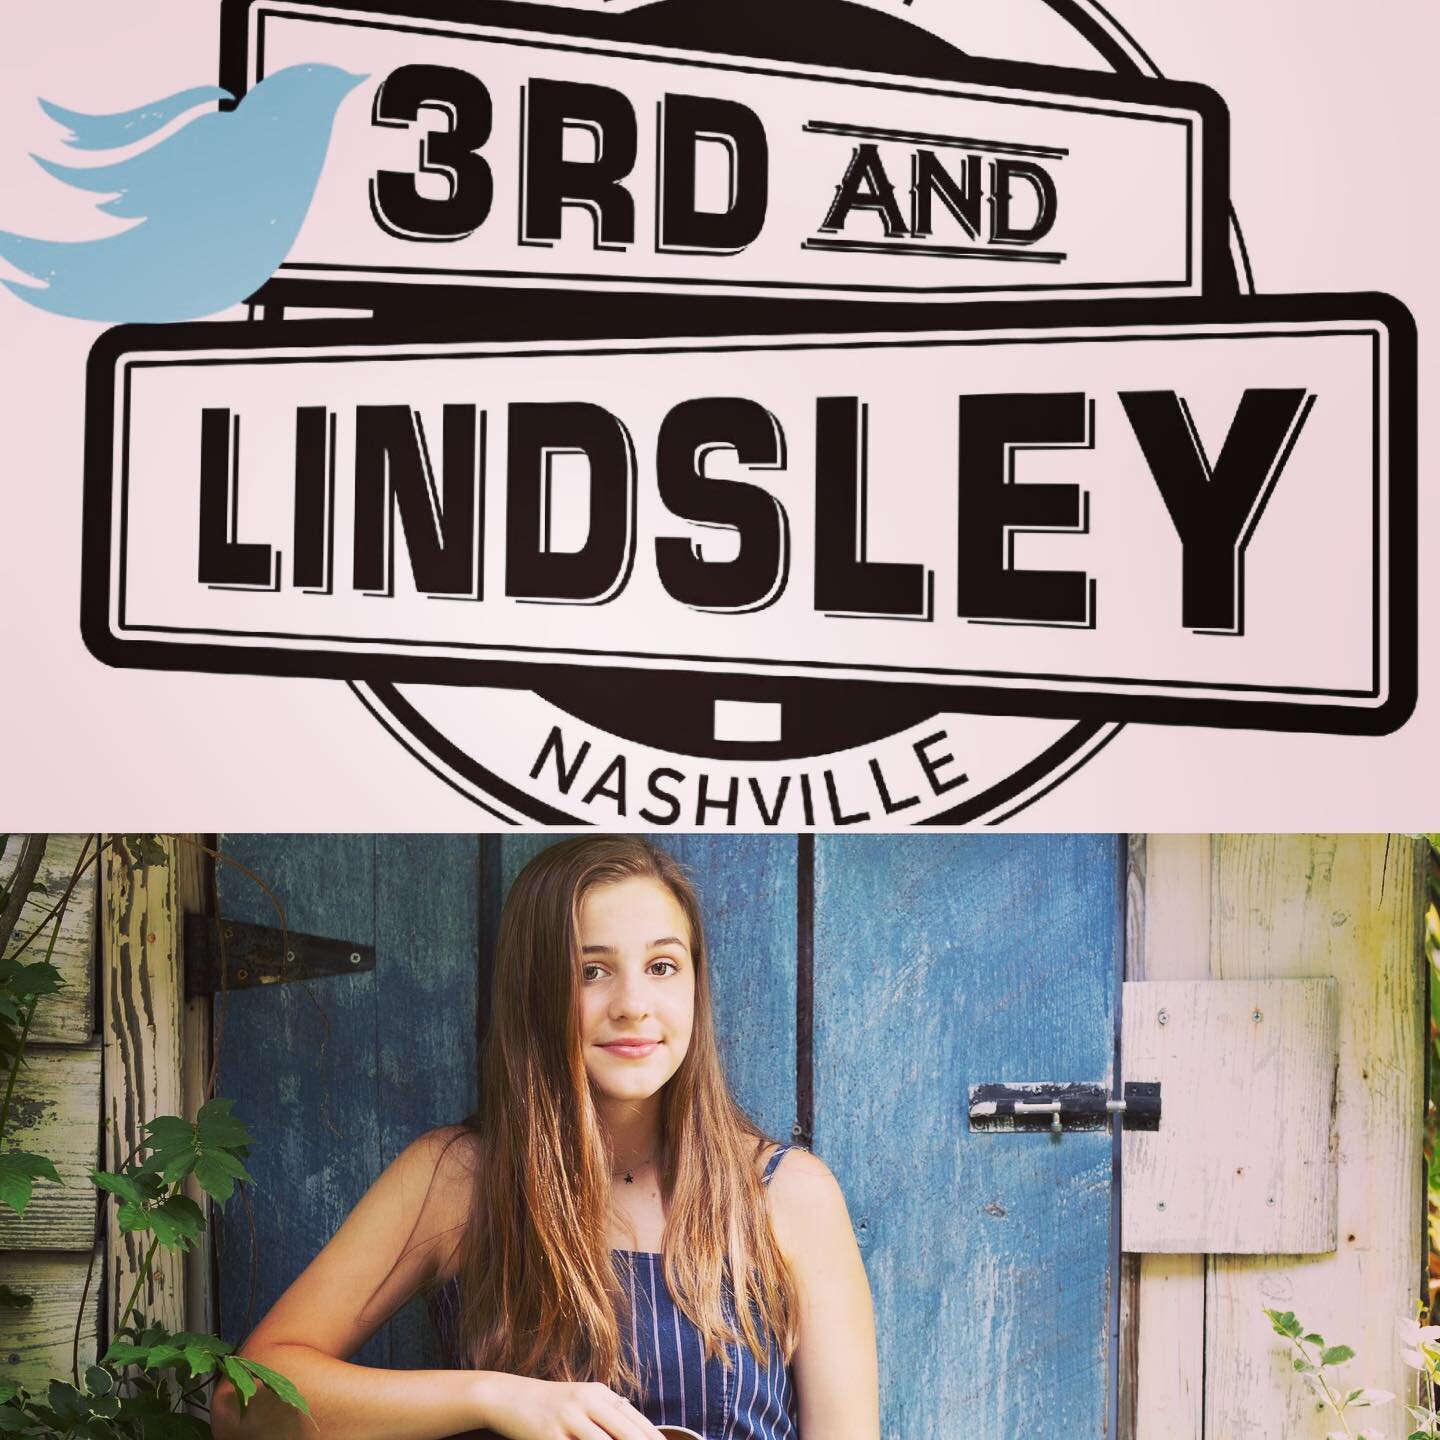 so excited to be playing @bluebirdcafetn &lsquo;s live show at @3rdandlindsley on 10/22/20 at 7p!! doors open at 6p. tickets $15 at www.3rdandlindsley.com ✨🐦
- 
-
-
#bluebirdcafe #3rdandlindsley #songwriters #originalmusic